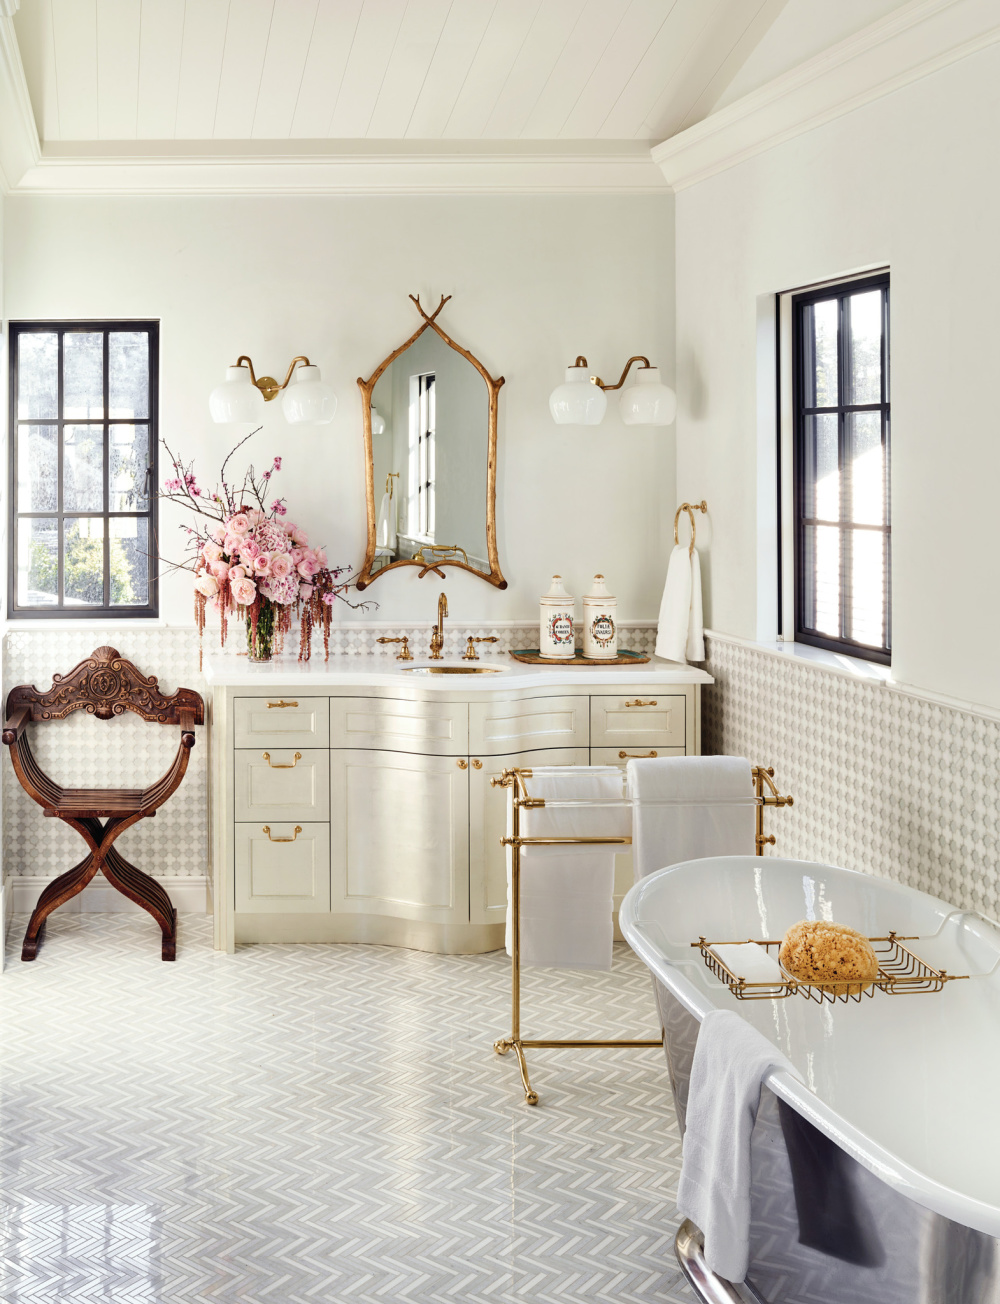 Elegant white bath with gold accents, clawfoot tub, and black windows - in THE ULTIMATE BATH by Barbara Sallick (Rizzoli, 2022).